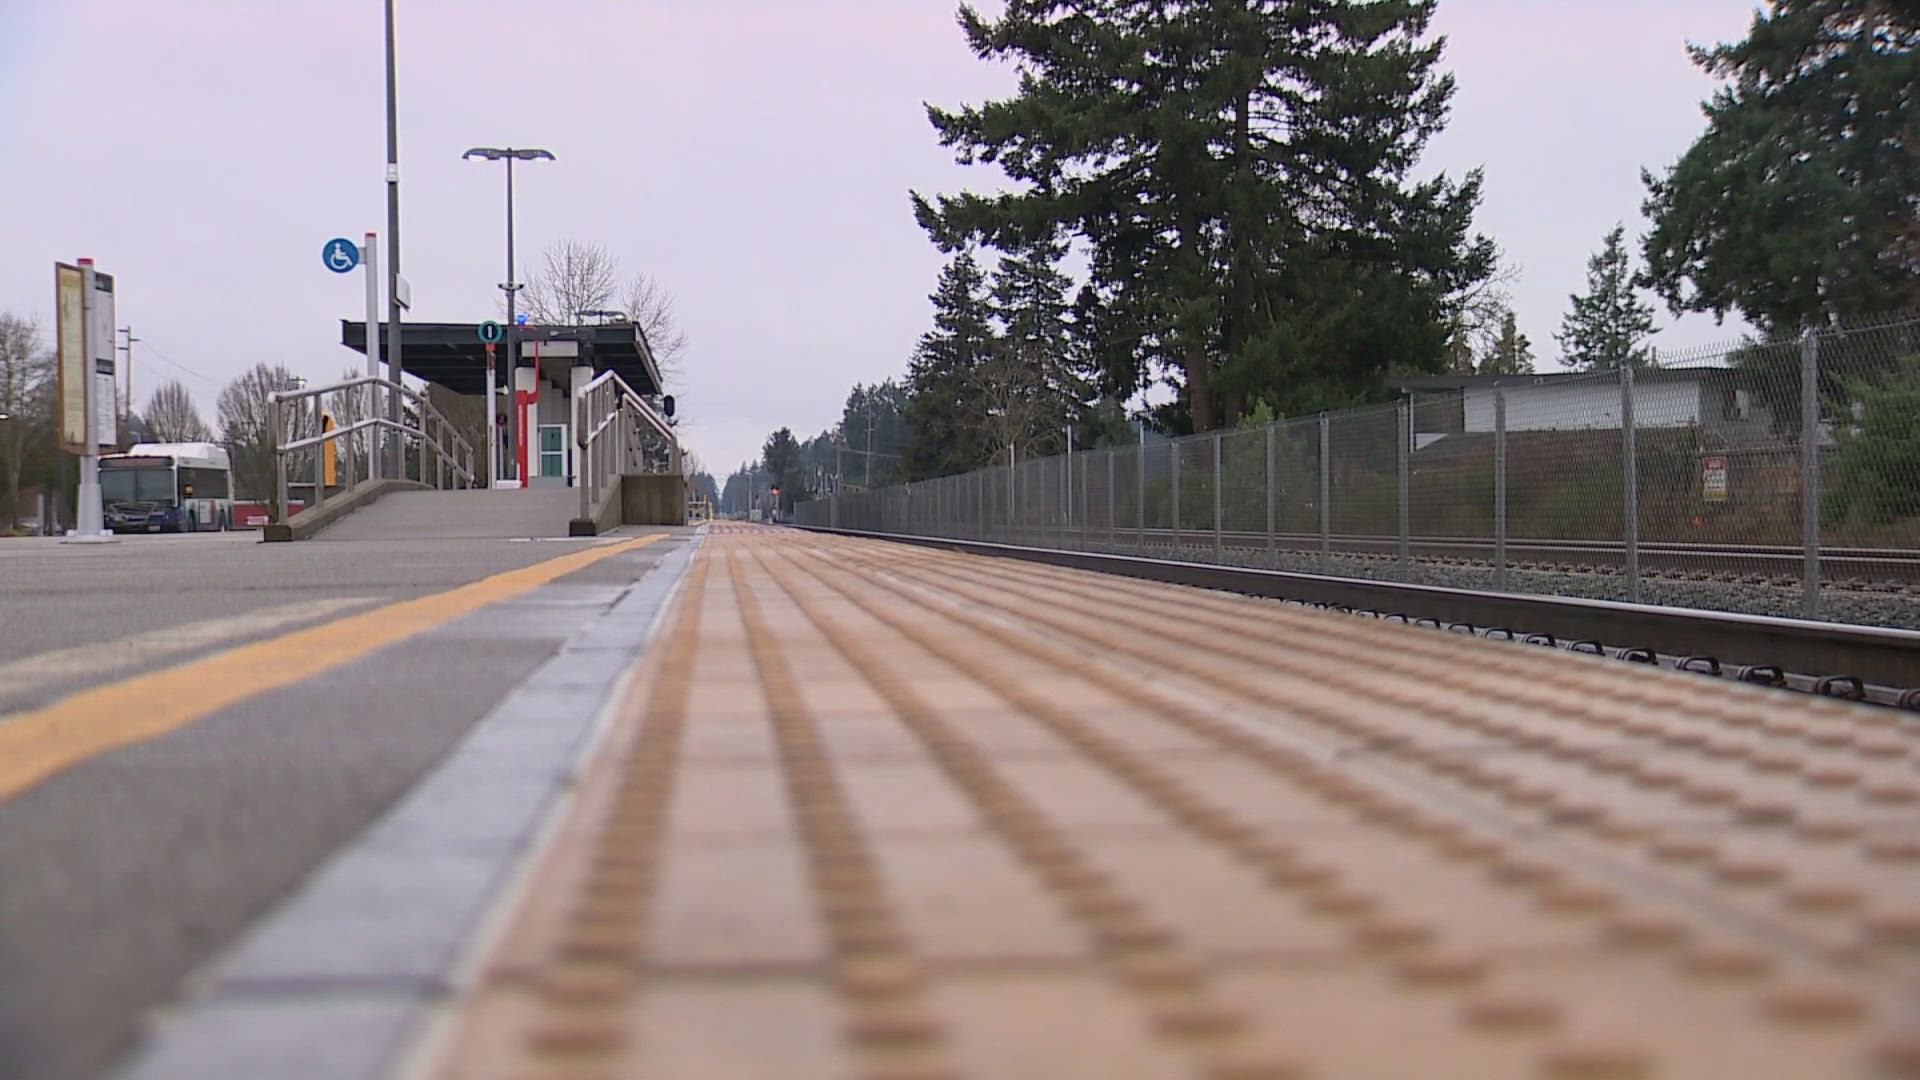 Sound Transit is preparing to make getting to some of its stations much more convenient over the next few years.